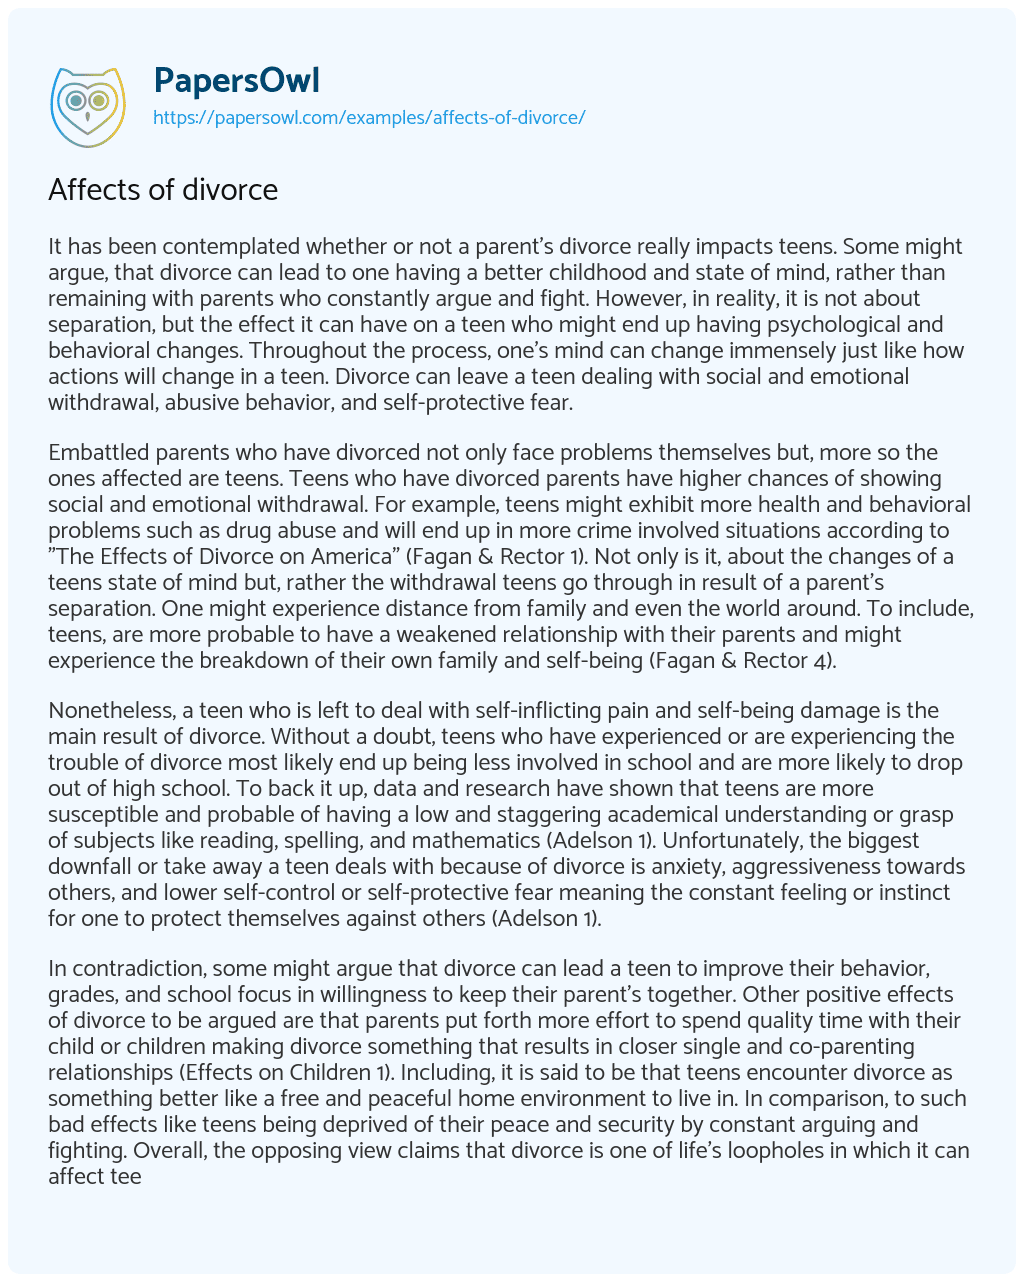 Affects of Divorce essay